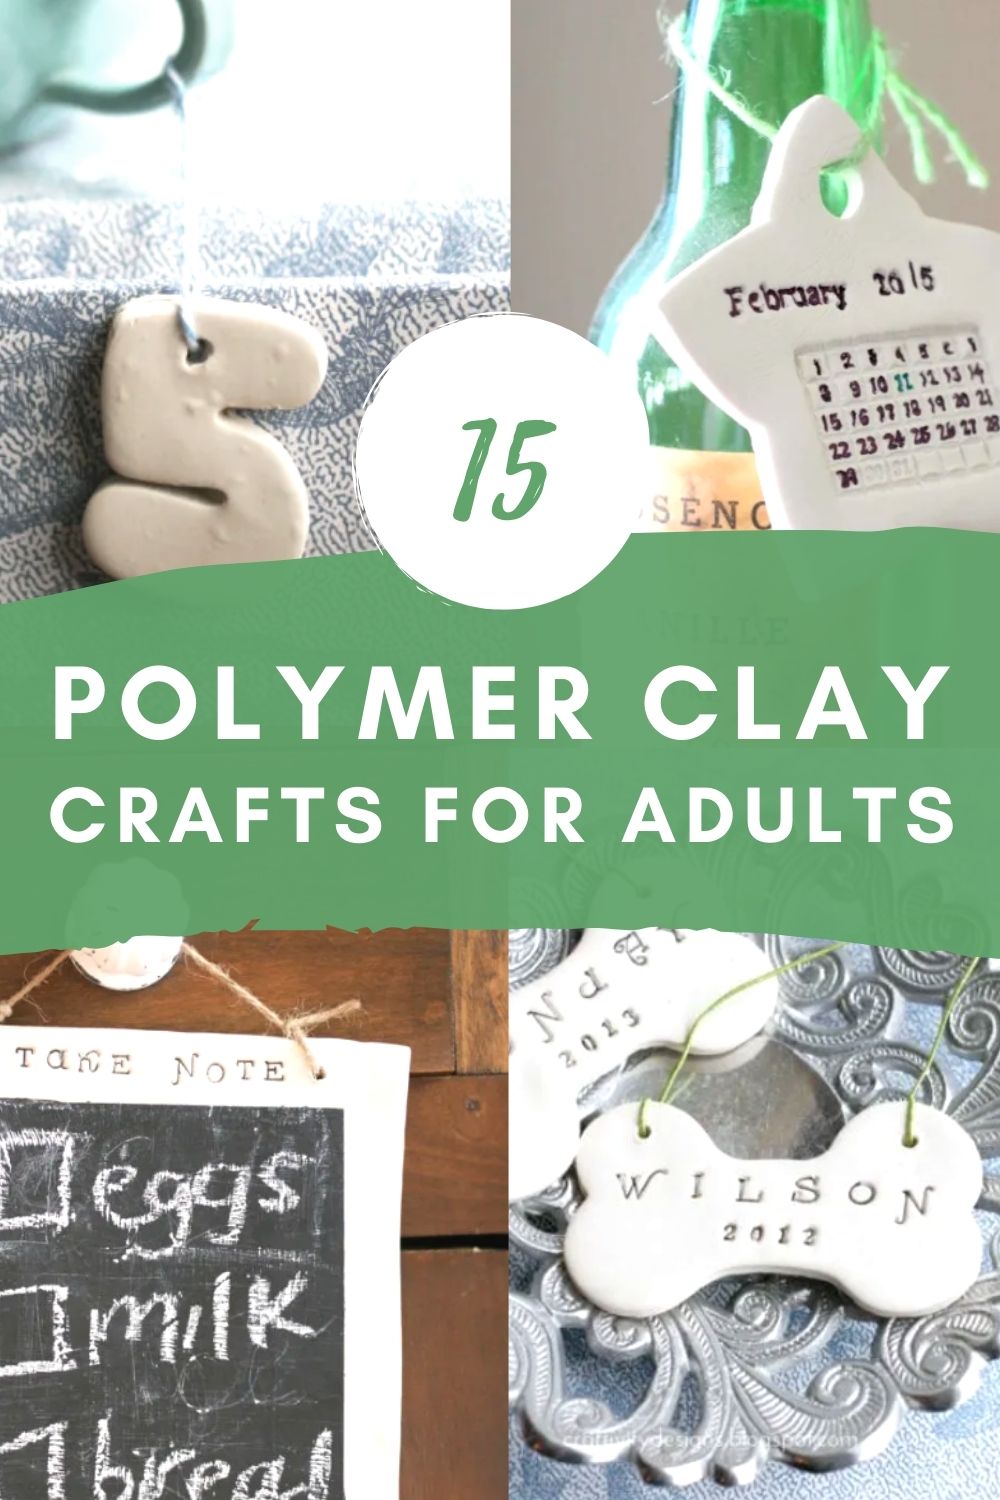 40 Easy Toddler Arts and Crafts -Kids Activities Blog